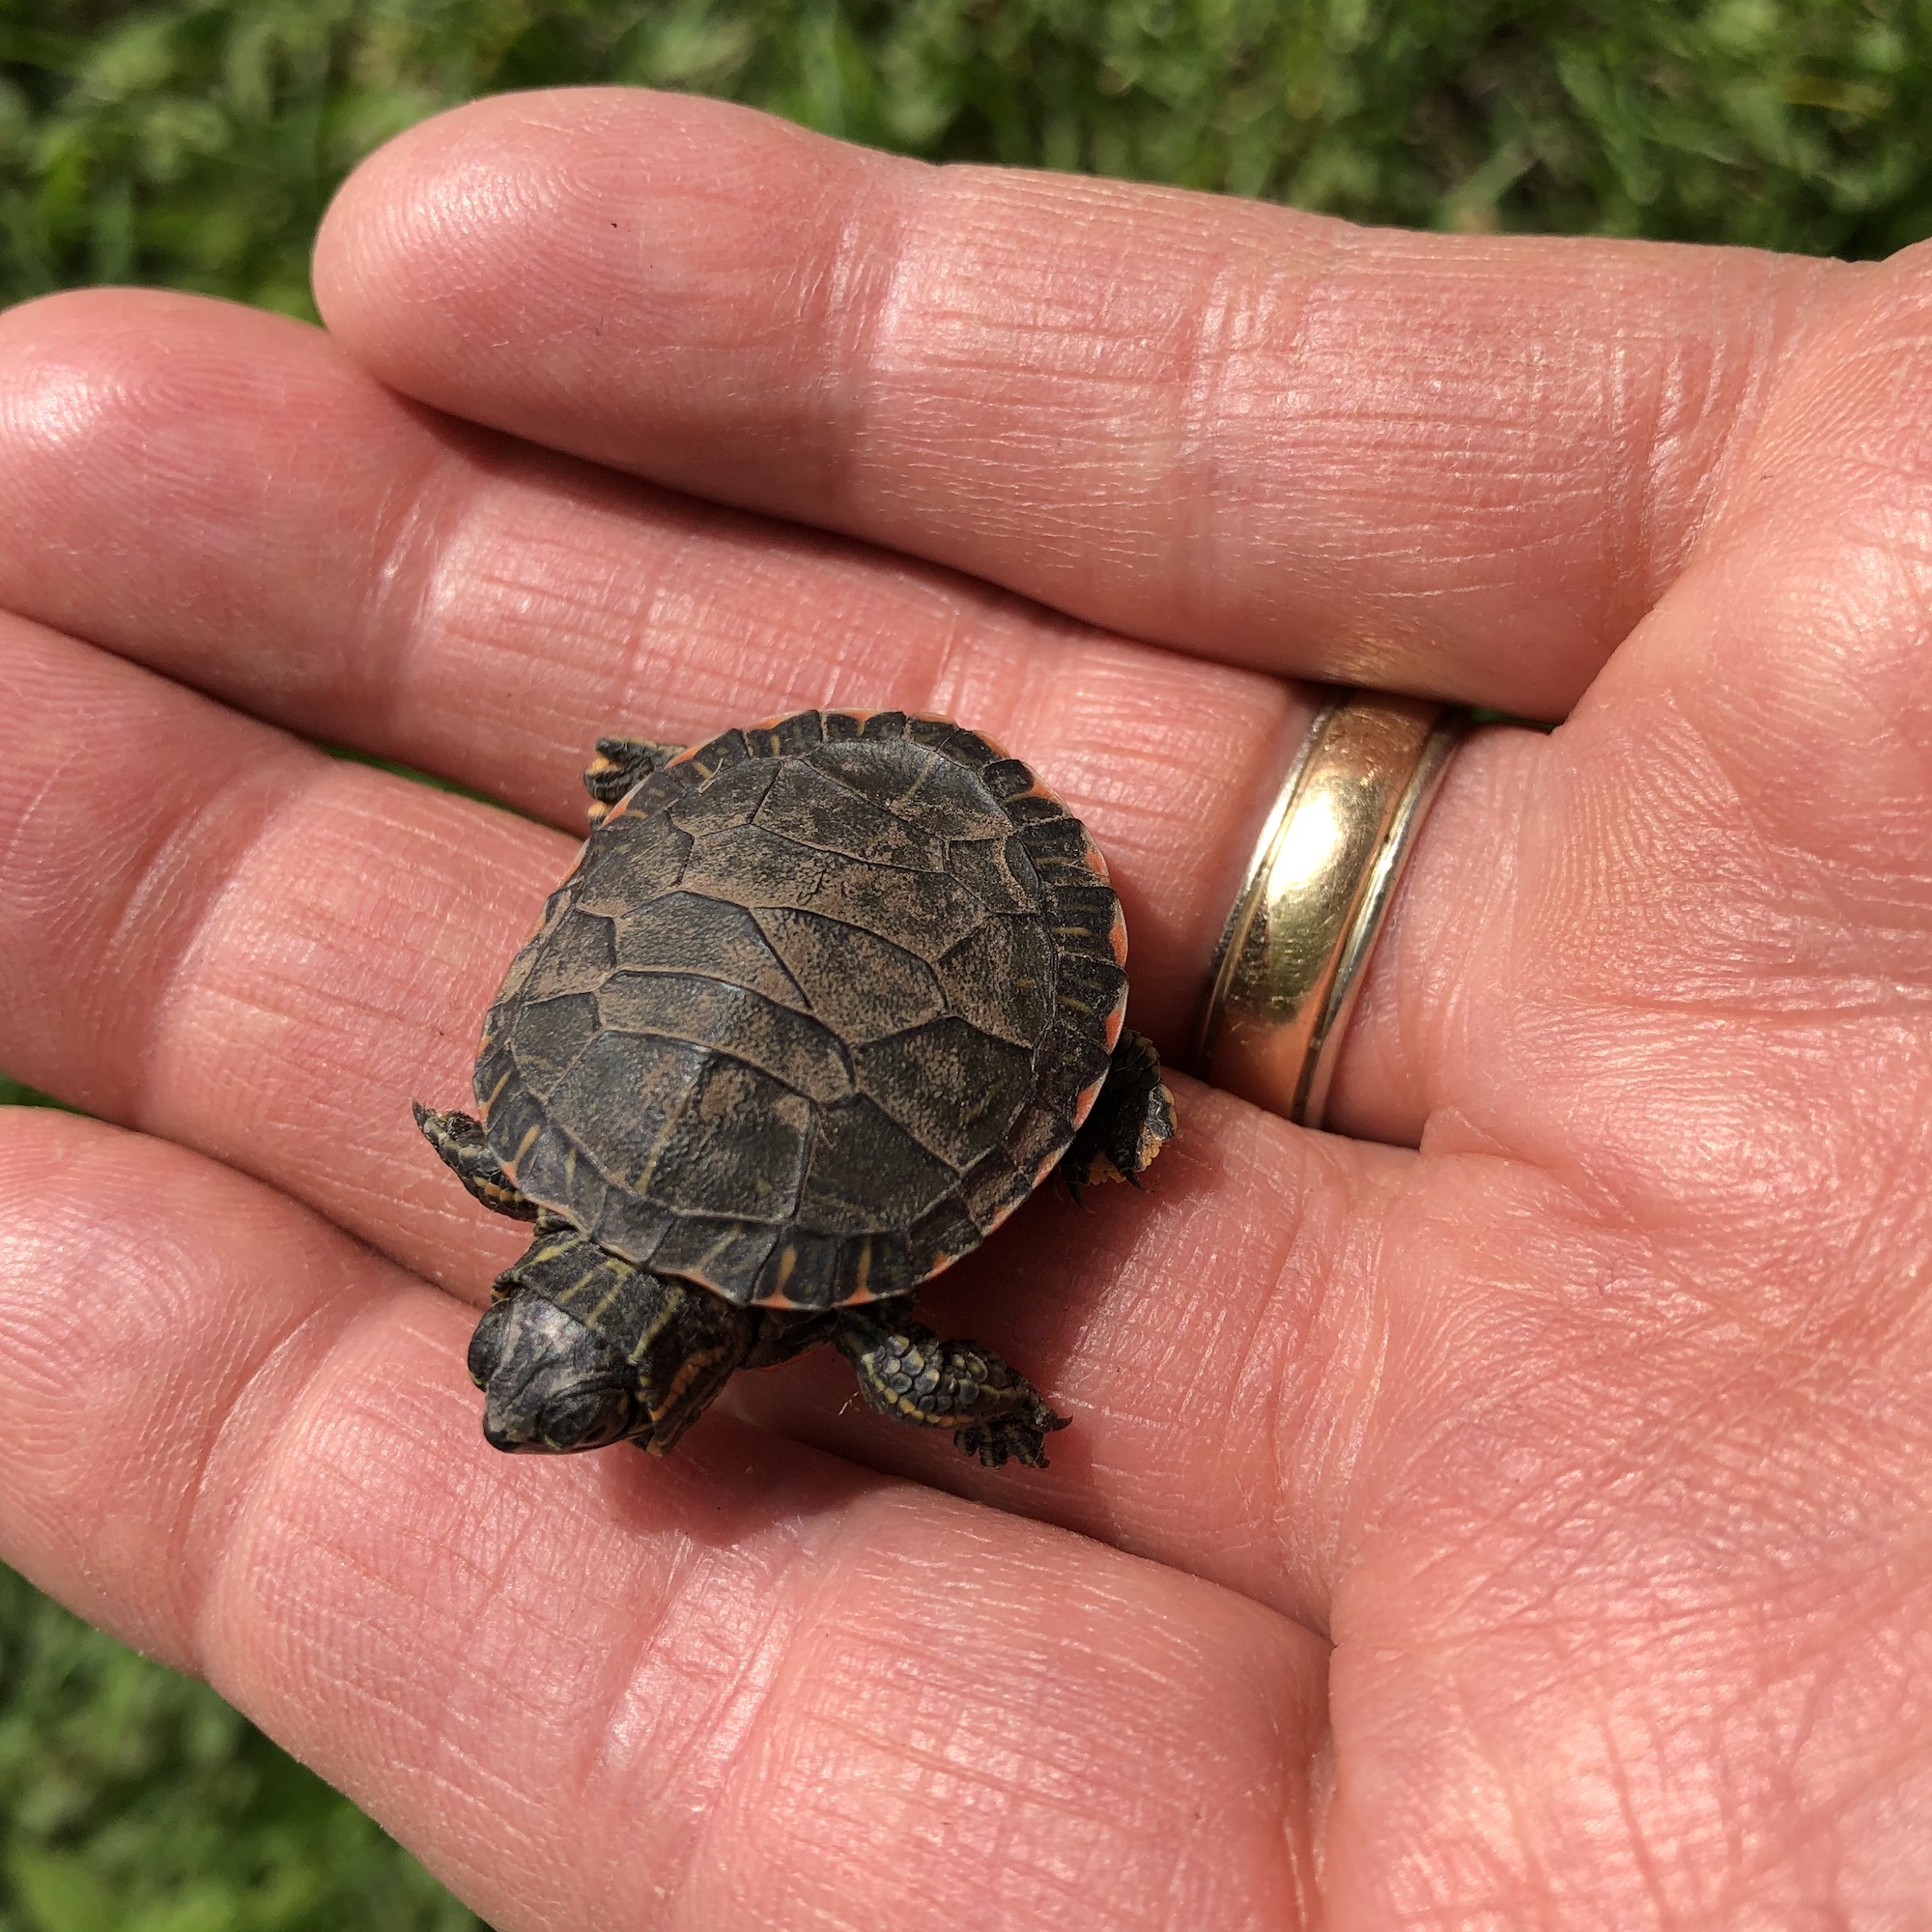 Baby Painted Turtle (Chrysemys picta marginata - Midland) found crossing Mandan Cresent in Madison, Wisconsin on May 6, 2019.